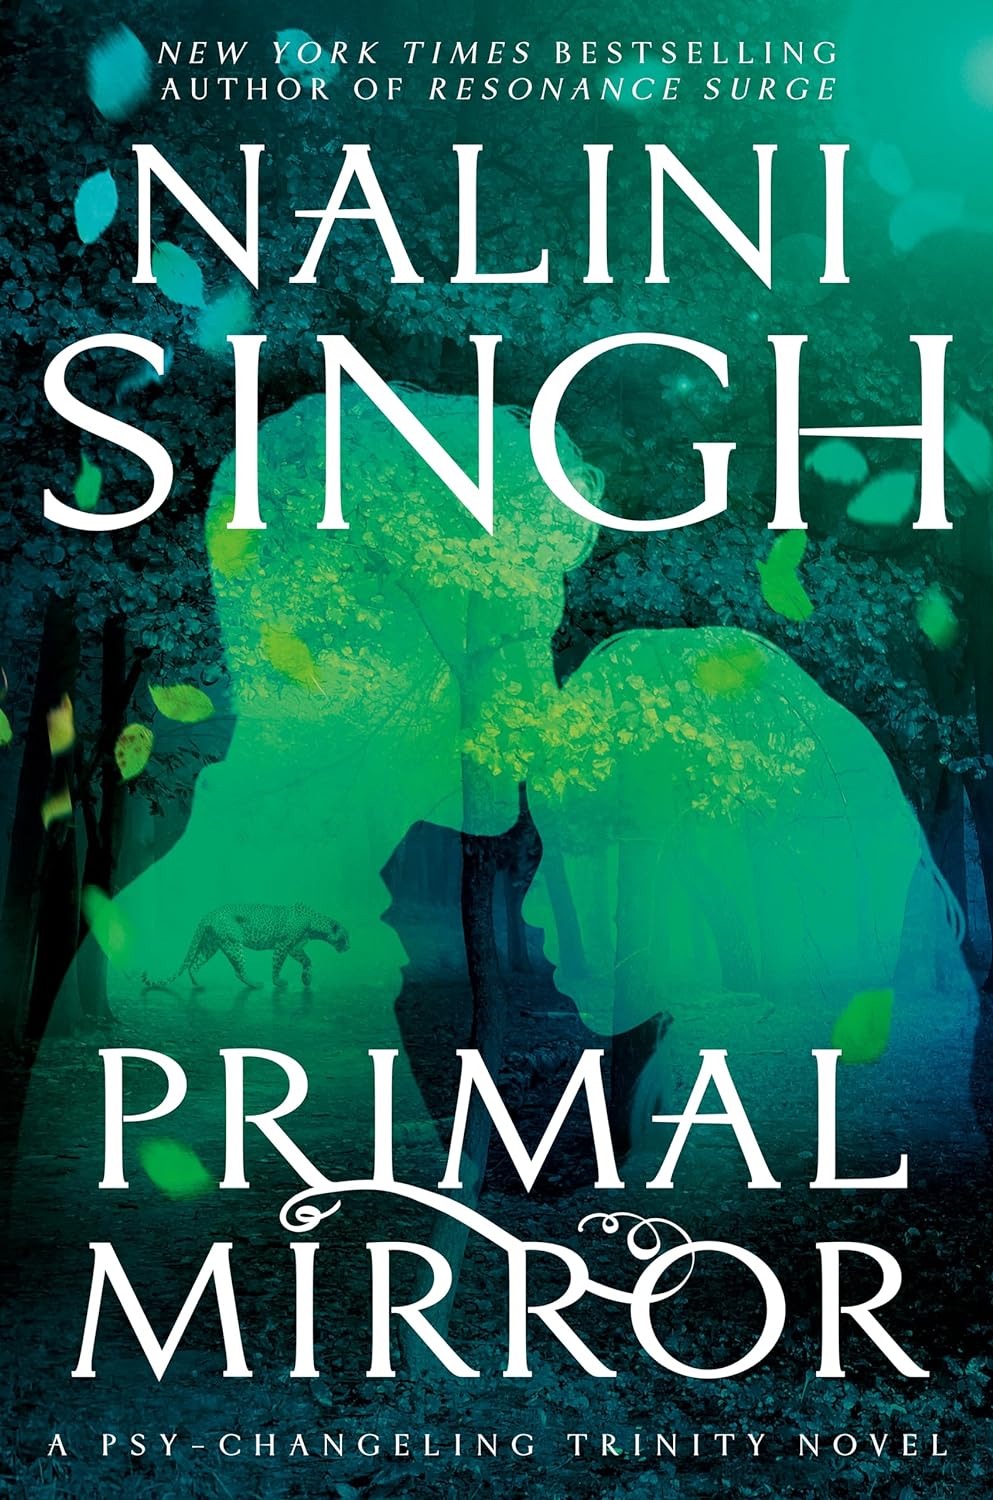 Image for "Primal Mirror"